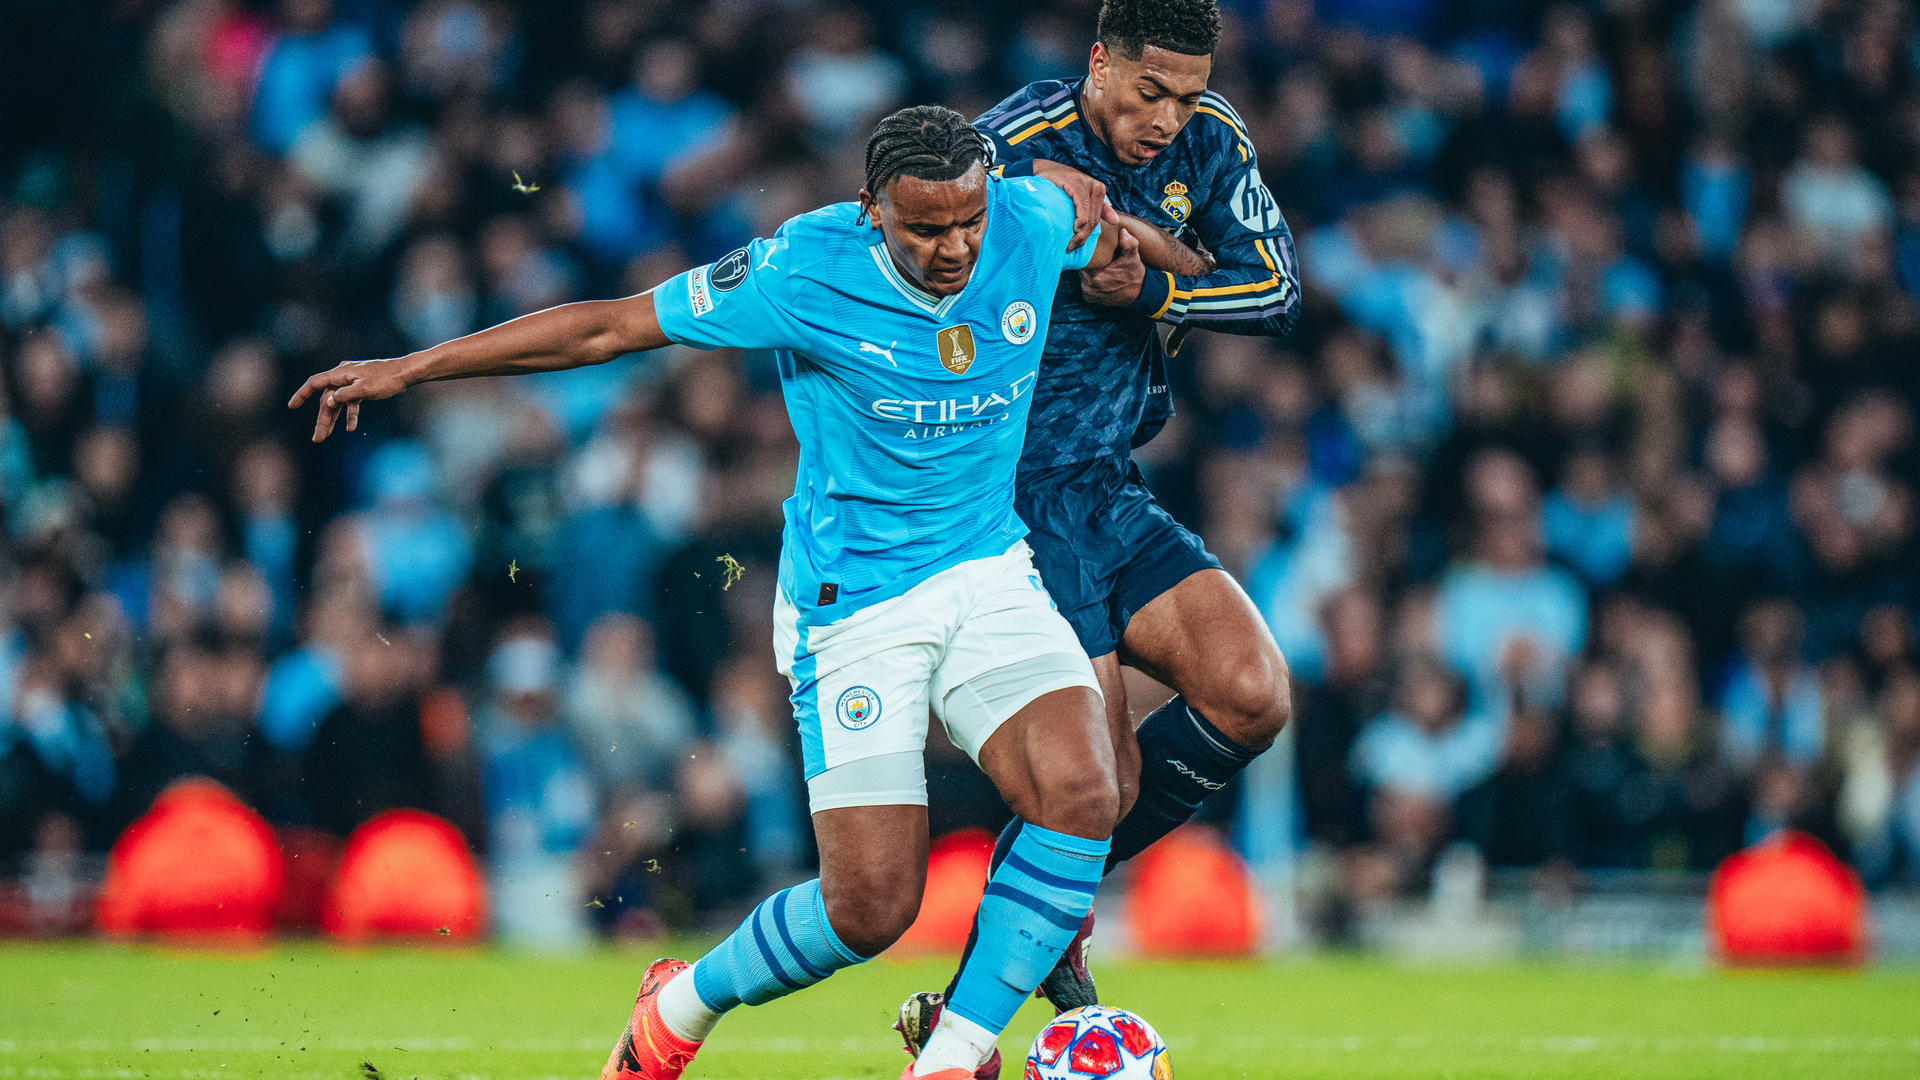 ACTION STATIONS: Manuel Akanji in the thick of things.